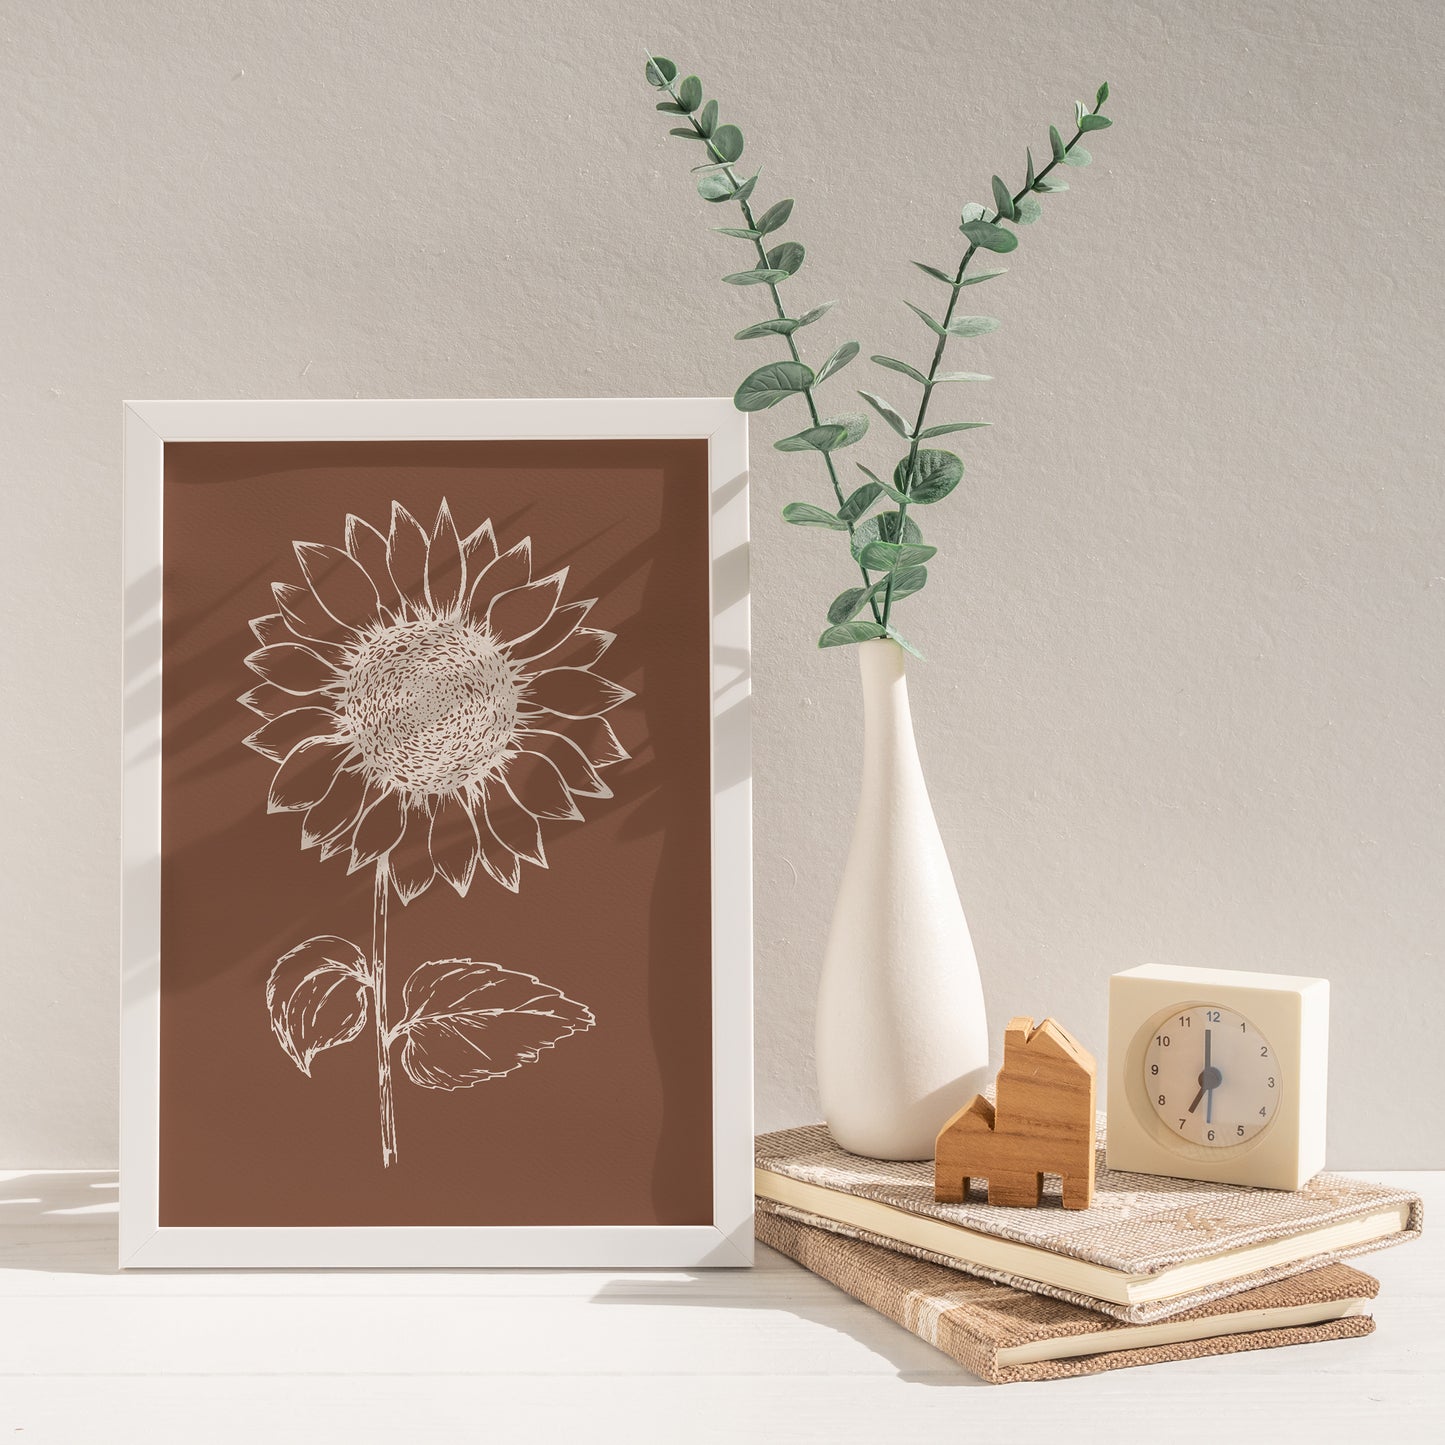 Rustic Sunflower Poster